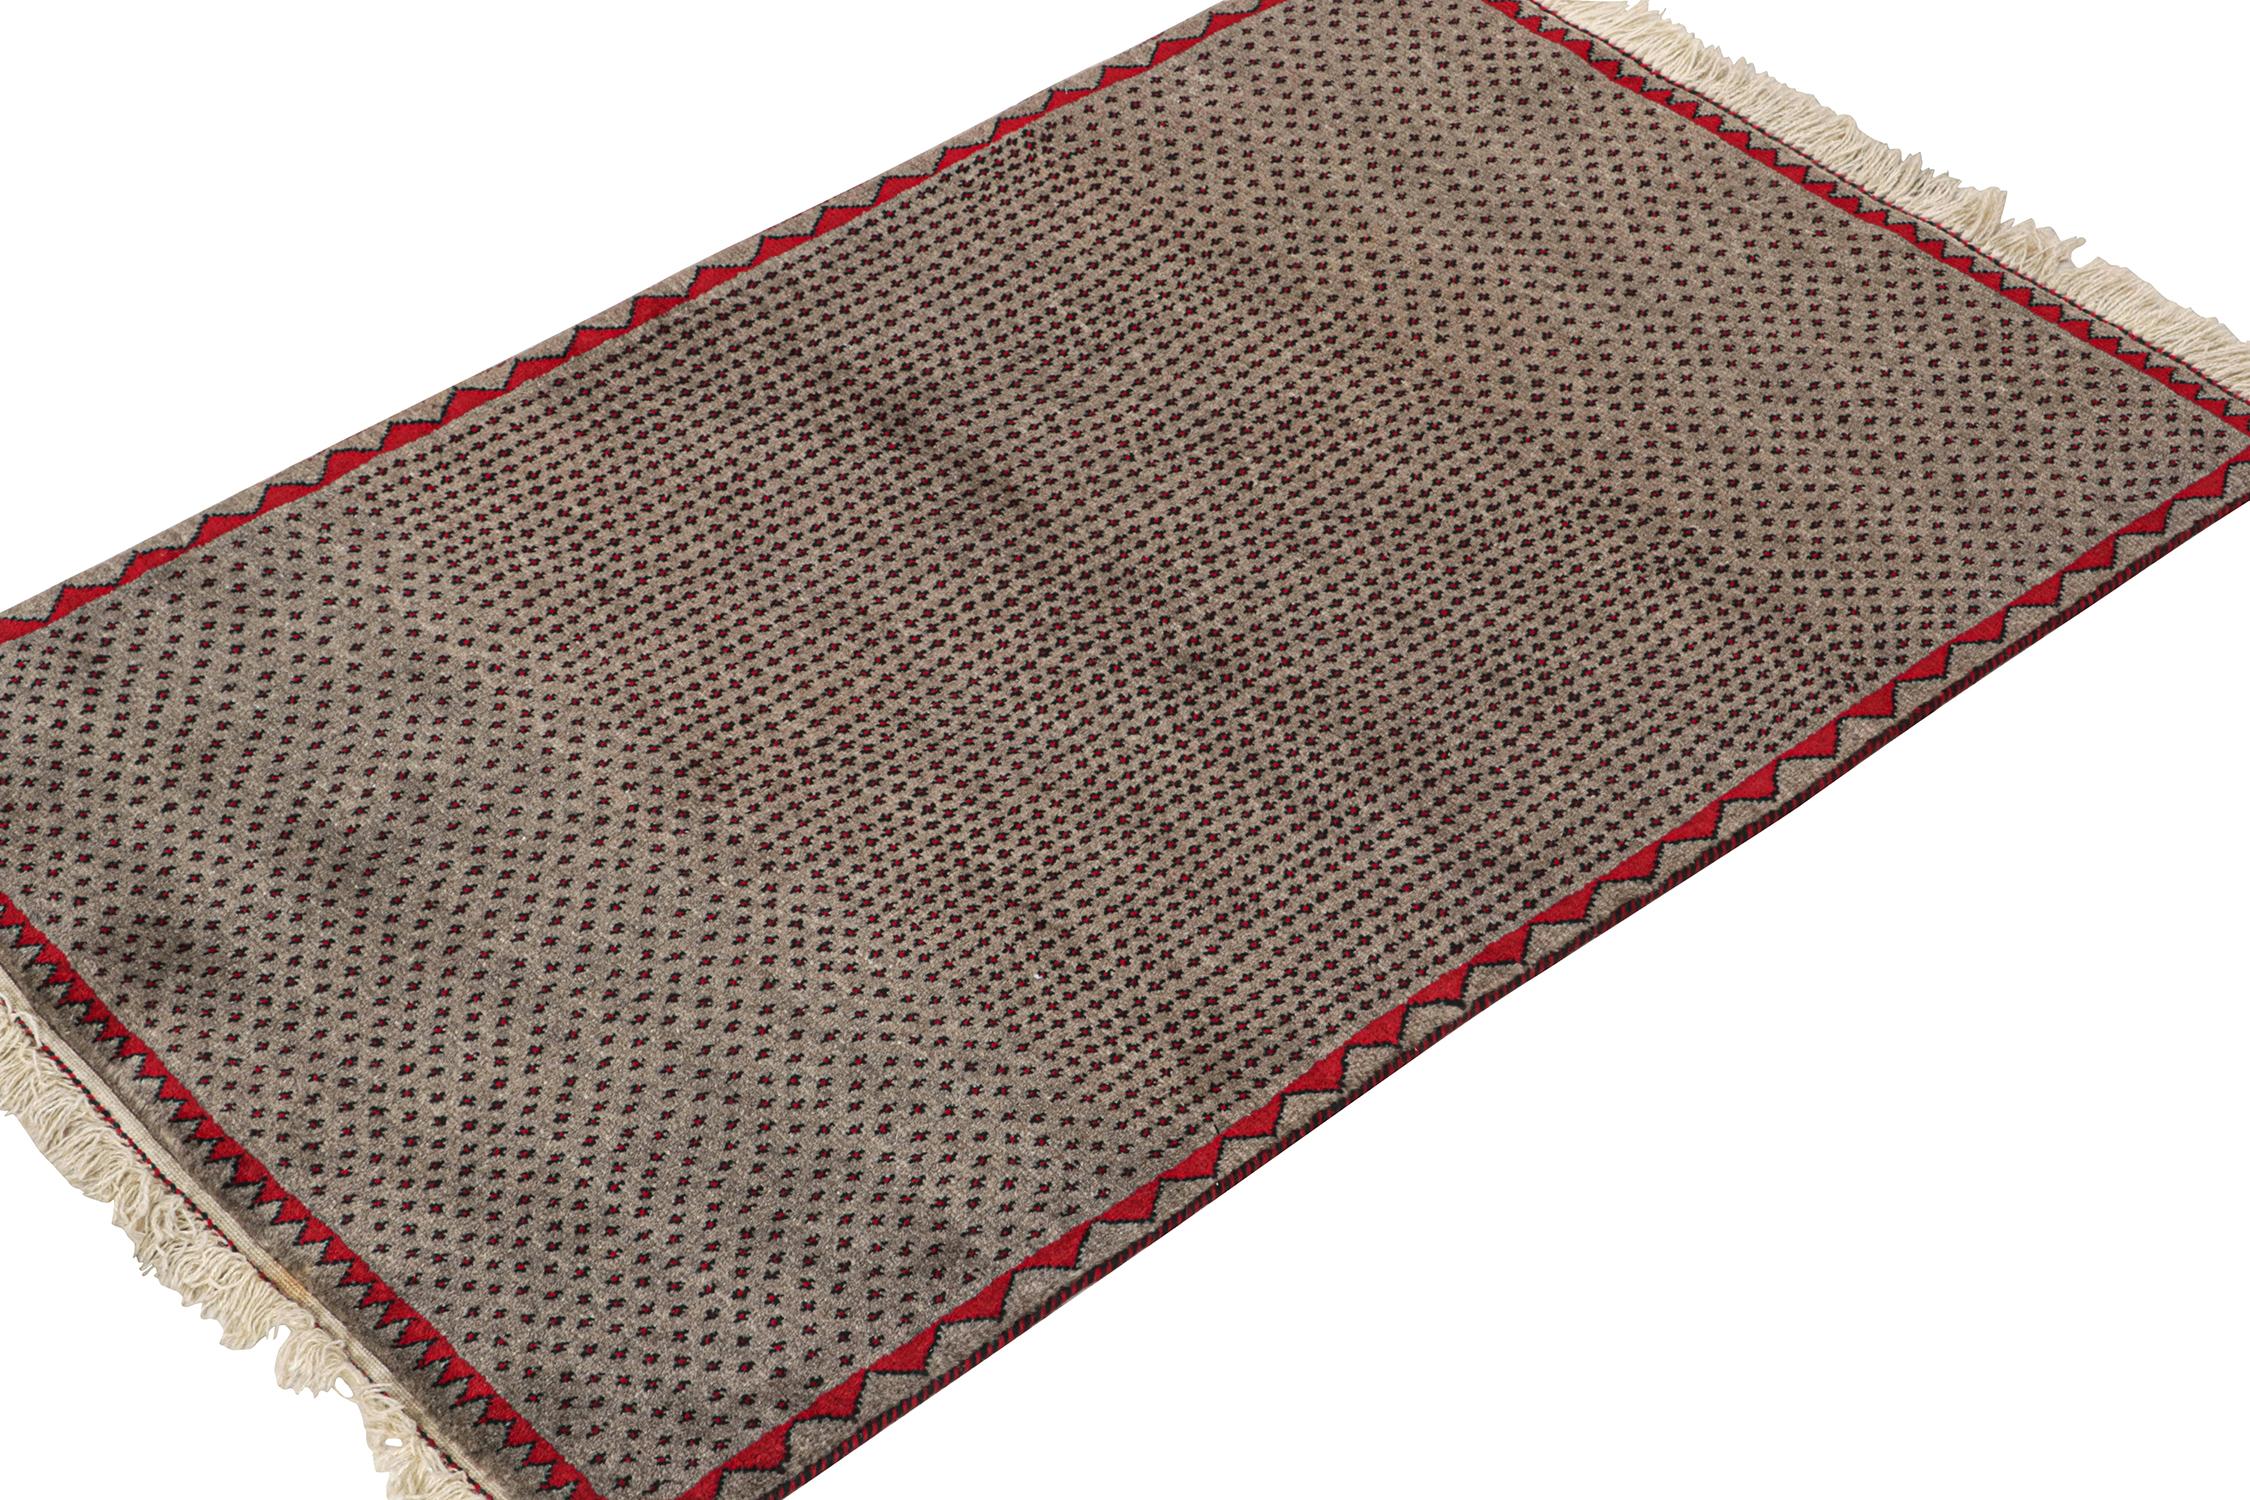 Tribal Vintage Persian Rug in Beige with Red & Black Geometric Patterns by Rug & Kilim For Sale